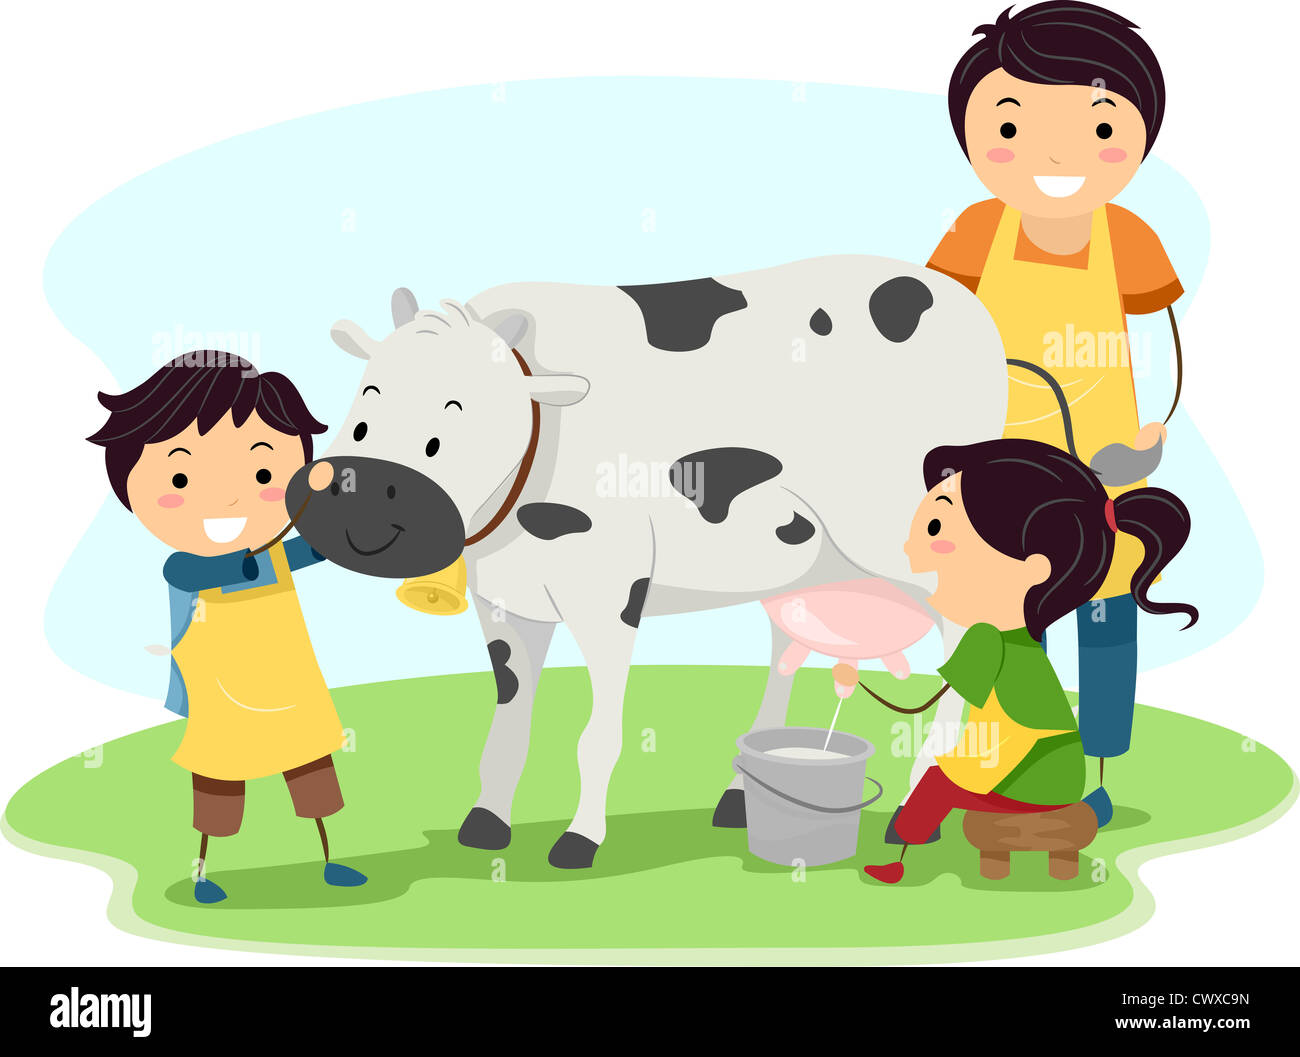 Illustration of Kids Happily Milking a Cow Stock Photo